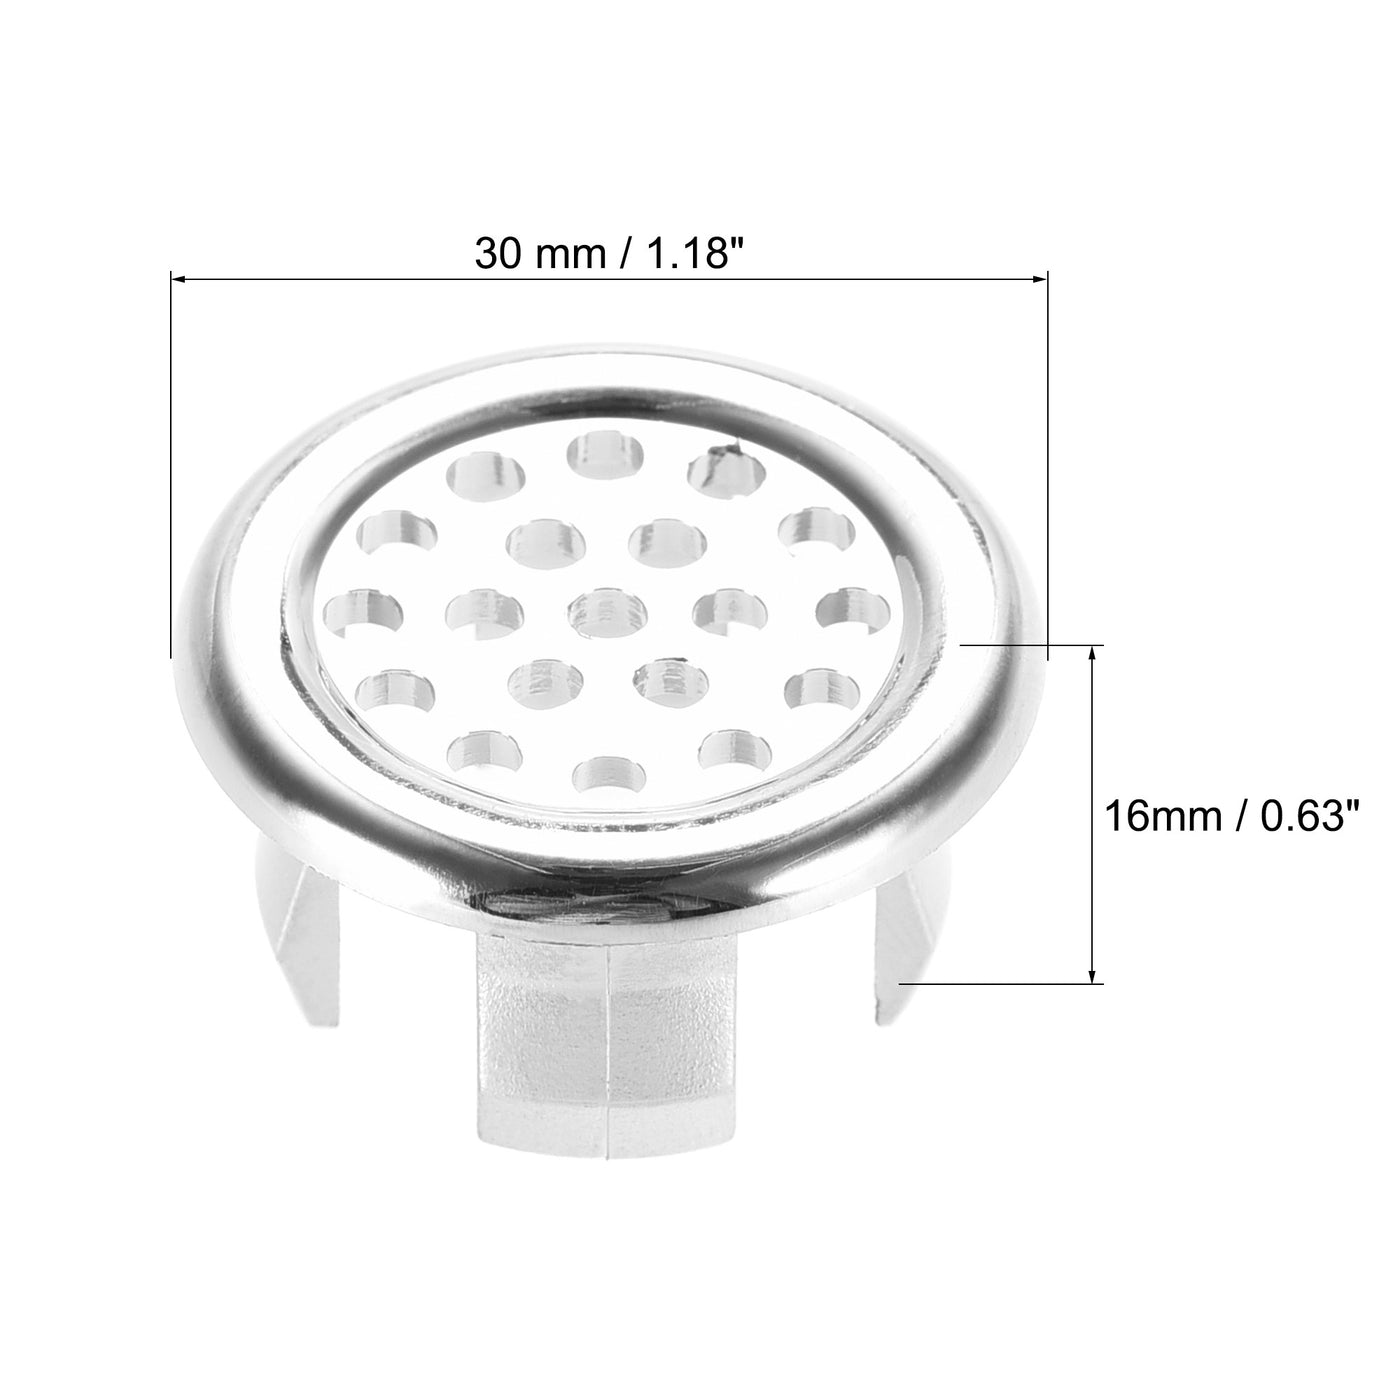 uxcell Uxcell Sink Basin Trim Overflow Cover Insert in Mesh Hole Round Caps Silver Tone 6pcs